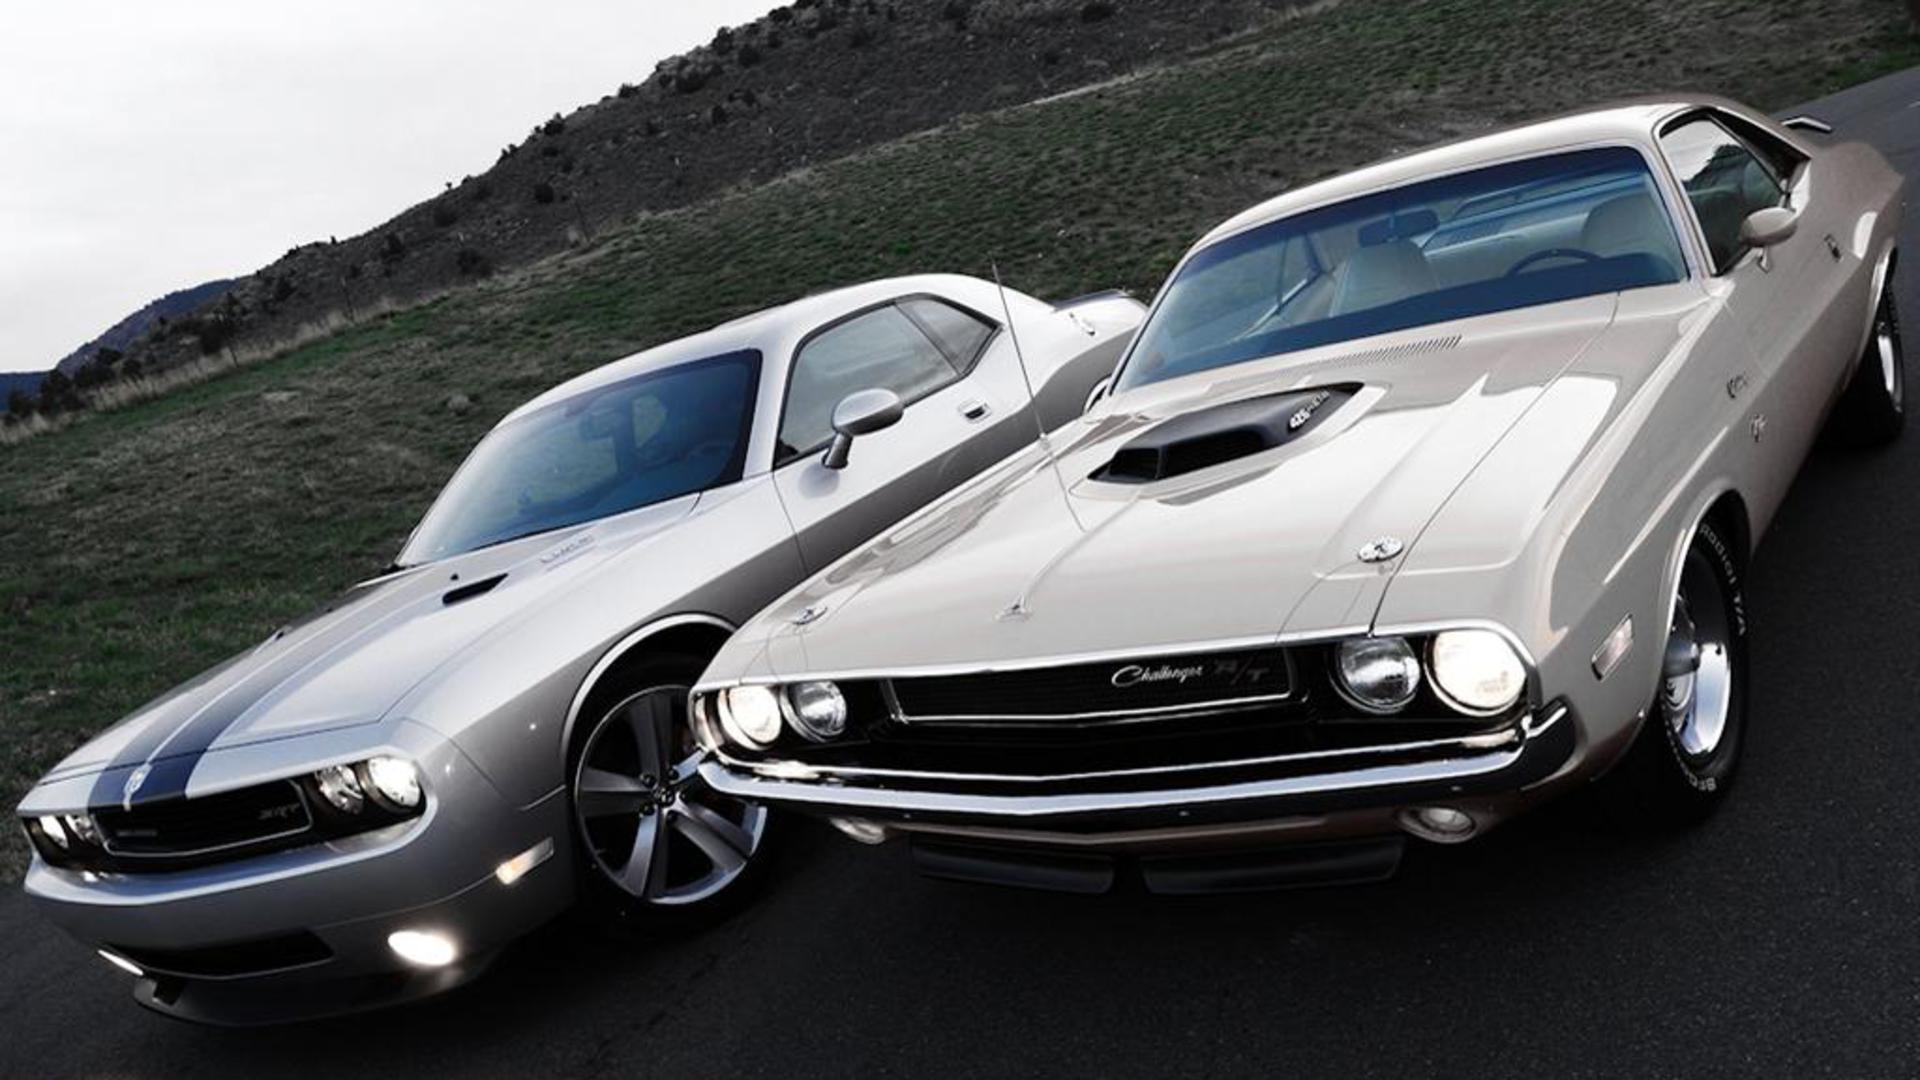 Muscle Cars Wallpaper 1920x1080 Muscle Cars Dodge Dodge Challenger